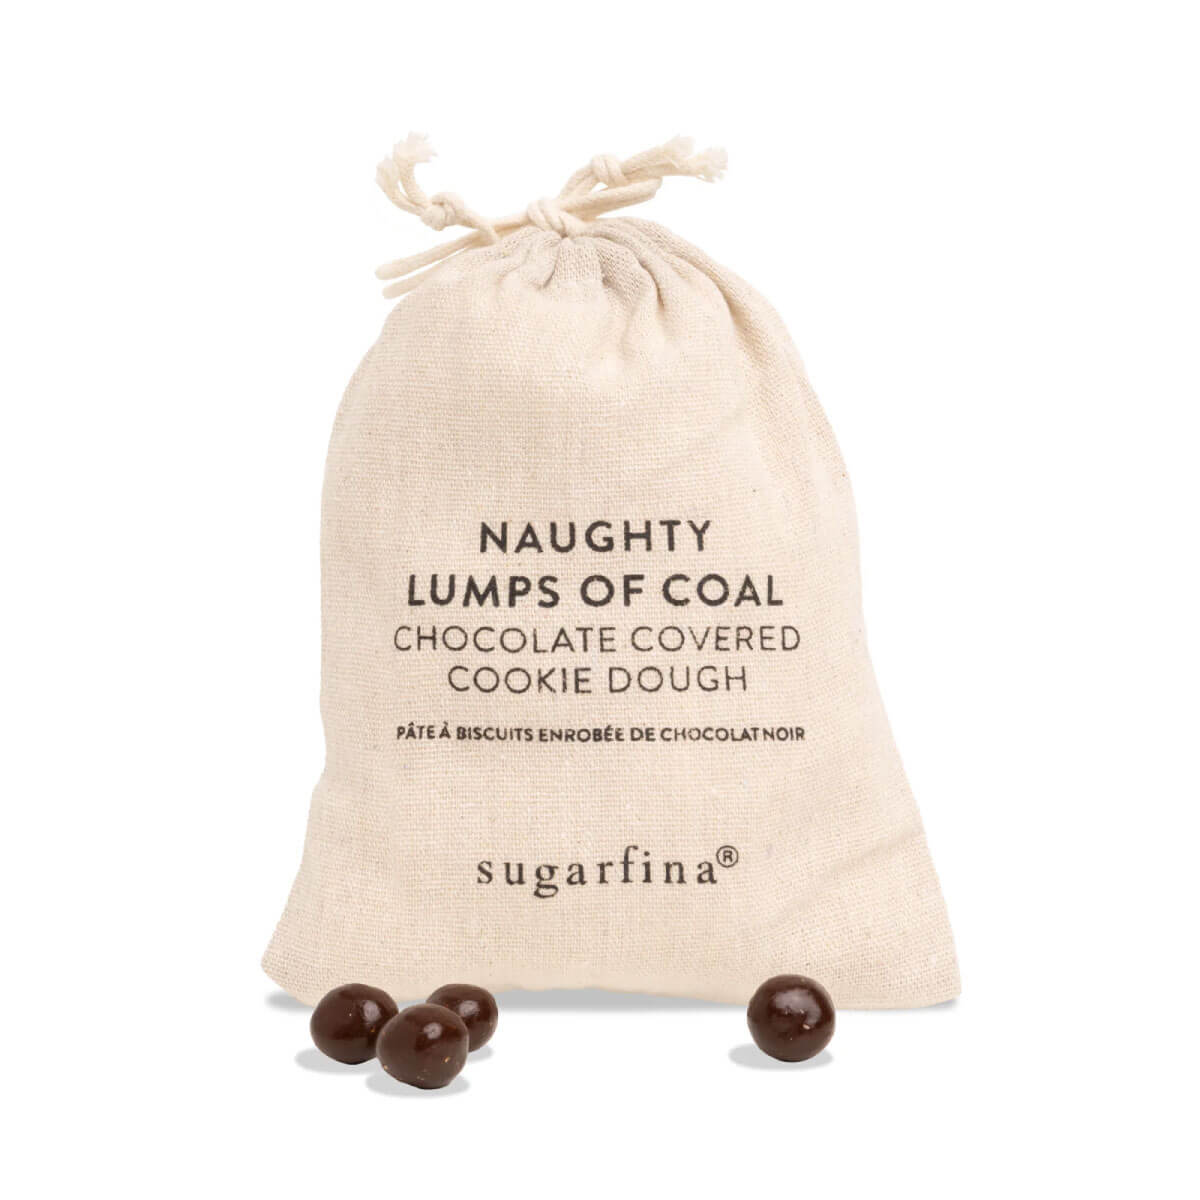 Sugarfina "Naughty" Lumps Of Coal Chocolate Covered Cookie Dough inside | MILK MONEY milkmoney.co | cute gifts, holiday gifts, candy gifts